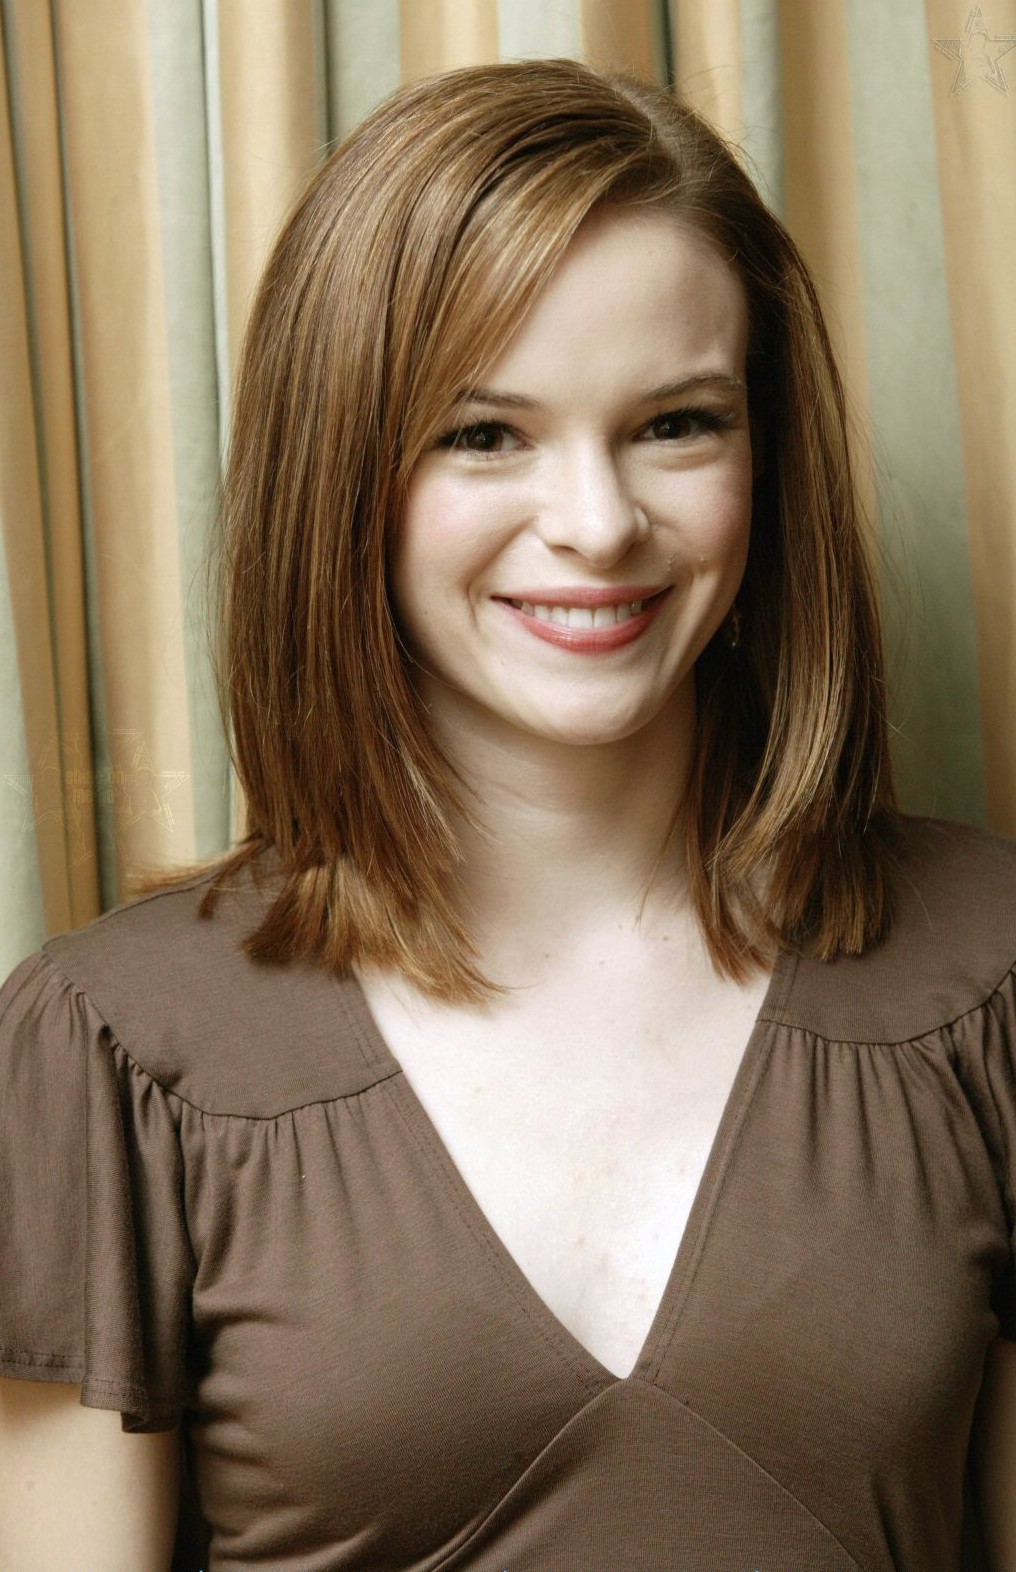 General photo of Danielle Panabaker